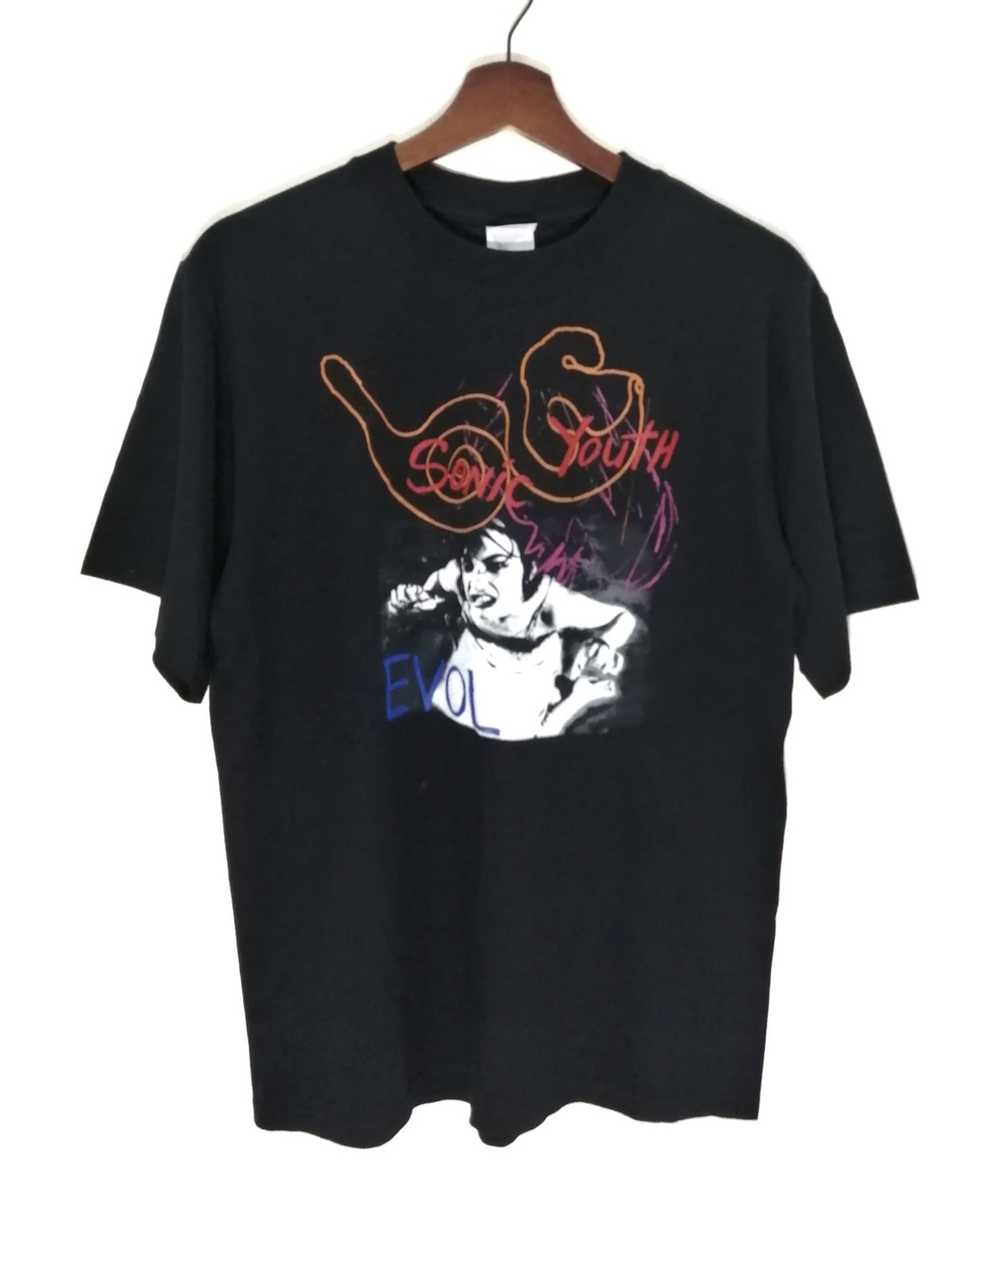 Band Tees × Rock Tees Vintage Sonic Youth Evol T-… - image 1